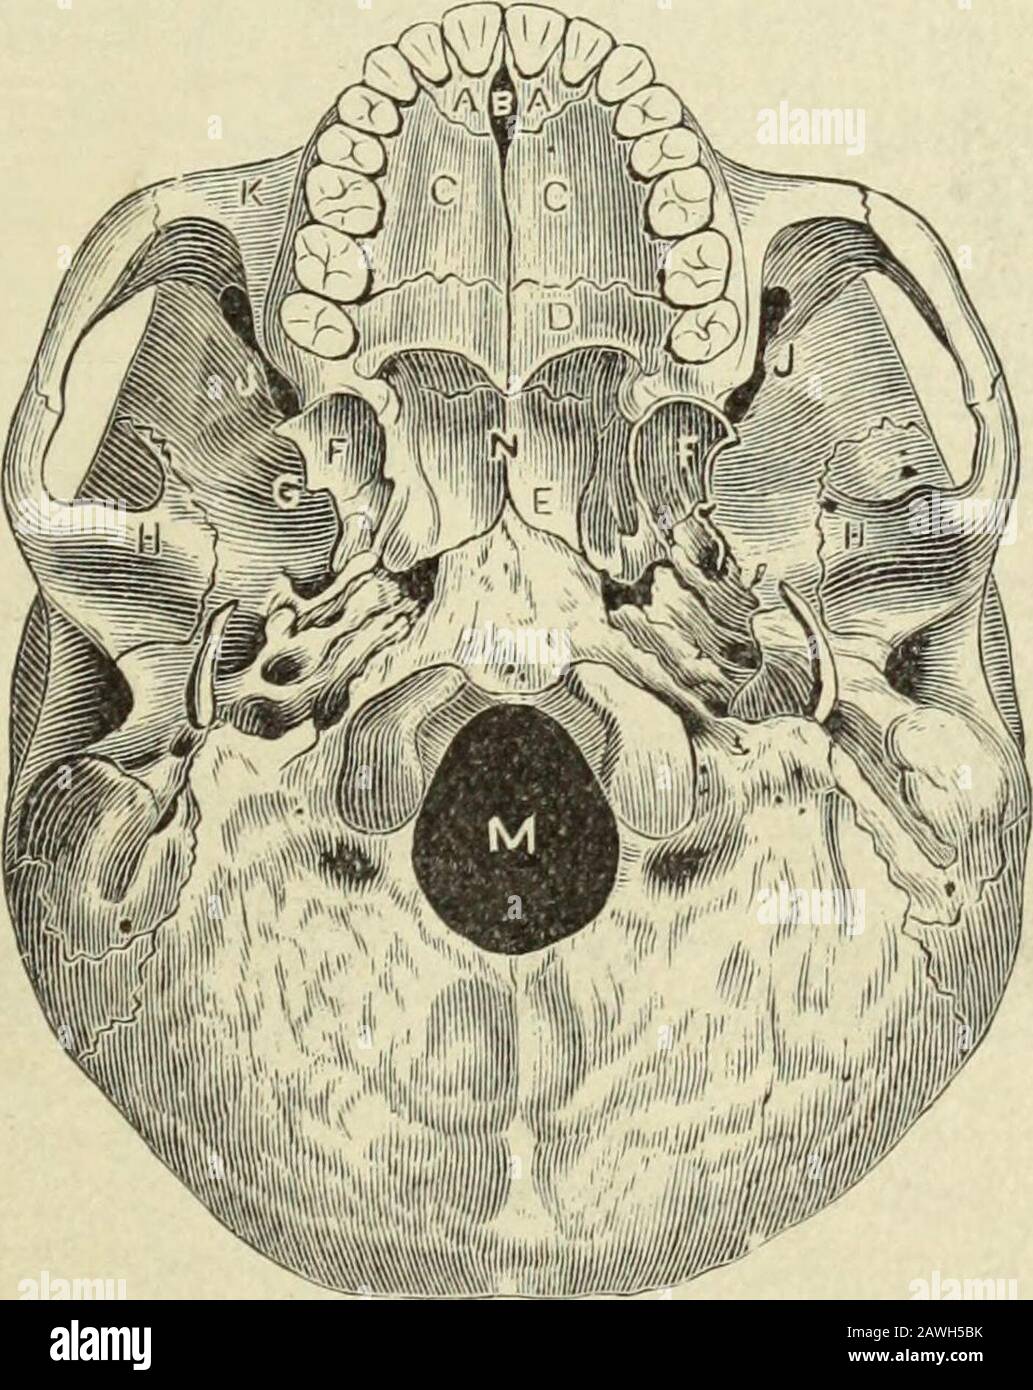 The Dental cosmos . te bone; E, body of sphenoid bone; F, ptery-goid process of sphenoid ; G, great wing of sphenoid ; H, location of glenoid fossa; J, spheno-maxillary fissure ; K, malar process of superior maxillary ; M, foramen magnum ; N, nasal sep-tum (vomer). In making the accompanying drawing (Fig. 4) [making drawing incharcoal] I desire to assist in establishing a system of thought by whicha clearer comprehension can be had of the time and order of the erup-tion of the teeth, the progressive stages of development of the maxil-lary bones after birth, and to assist in illustrating the ca Stock Photo